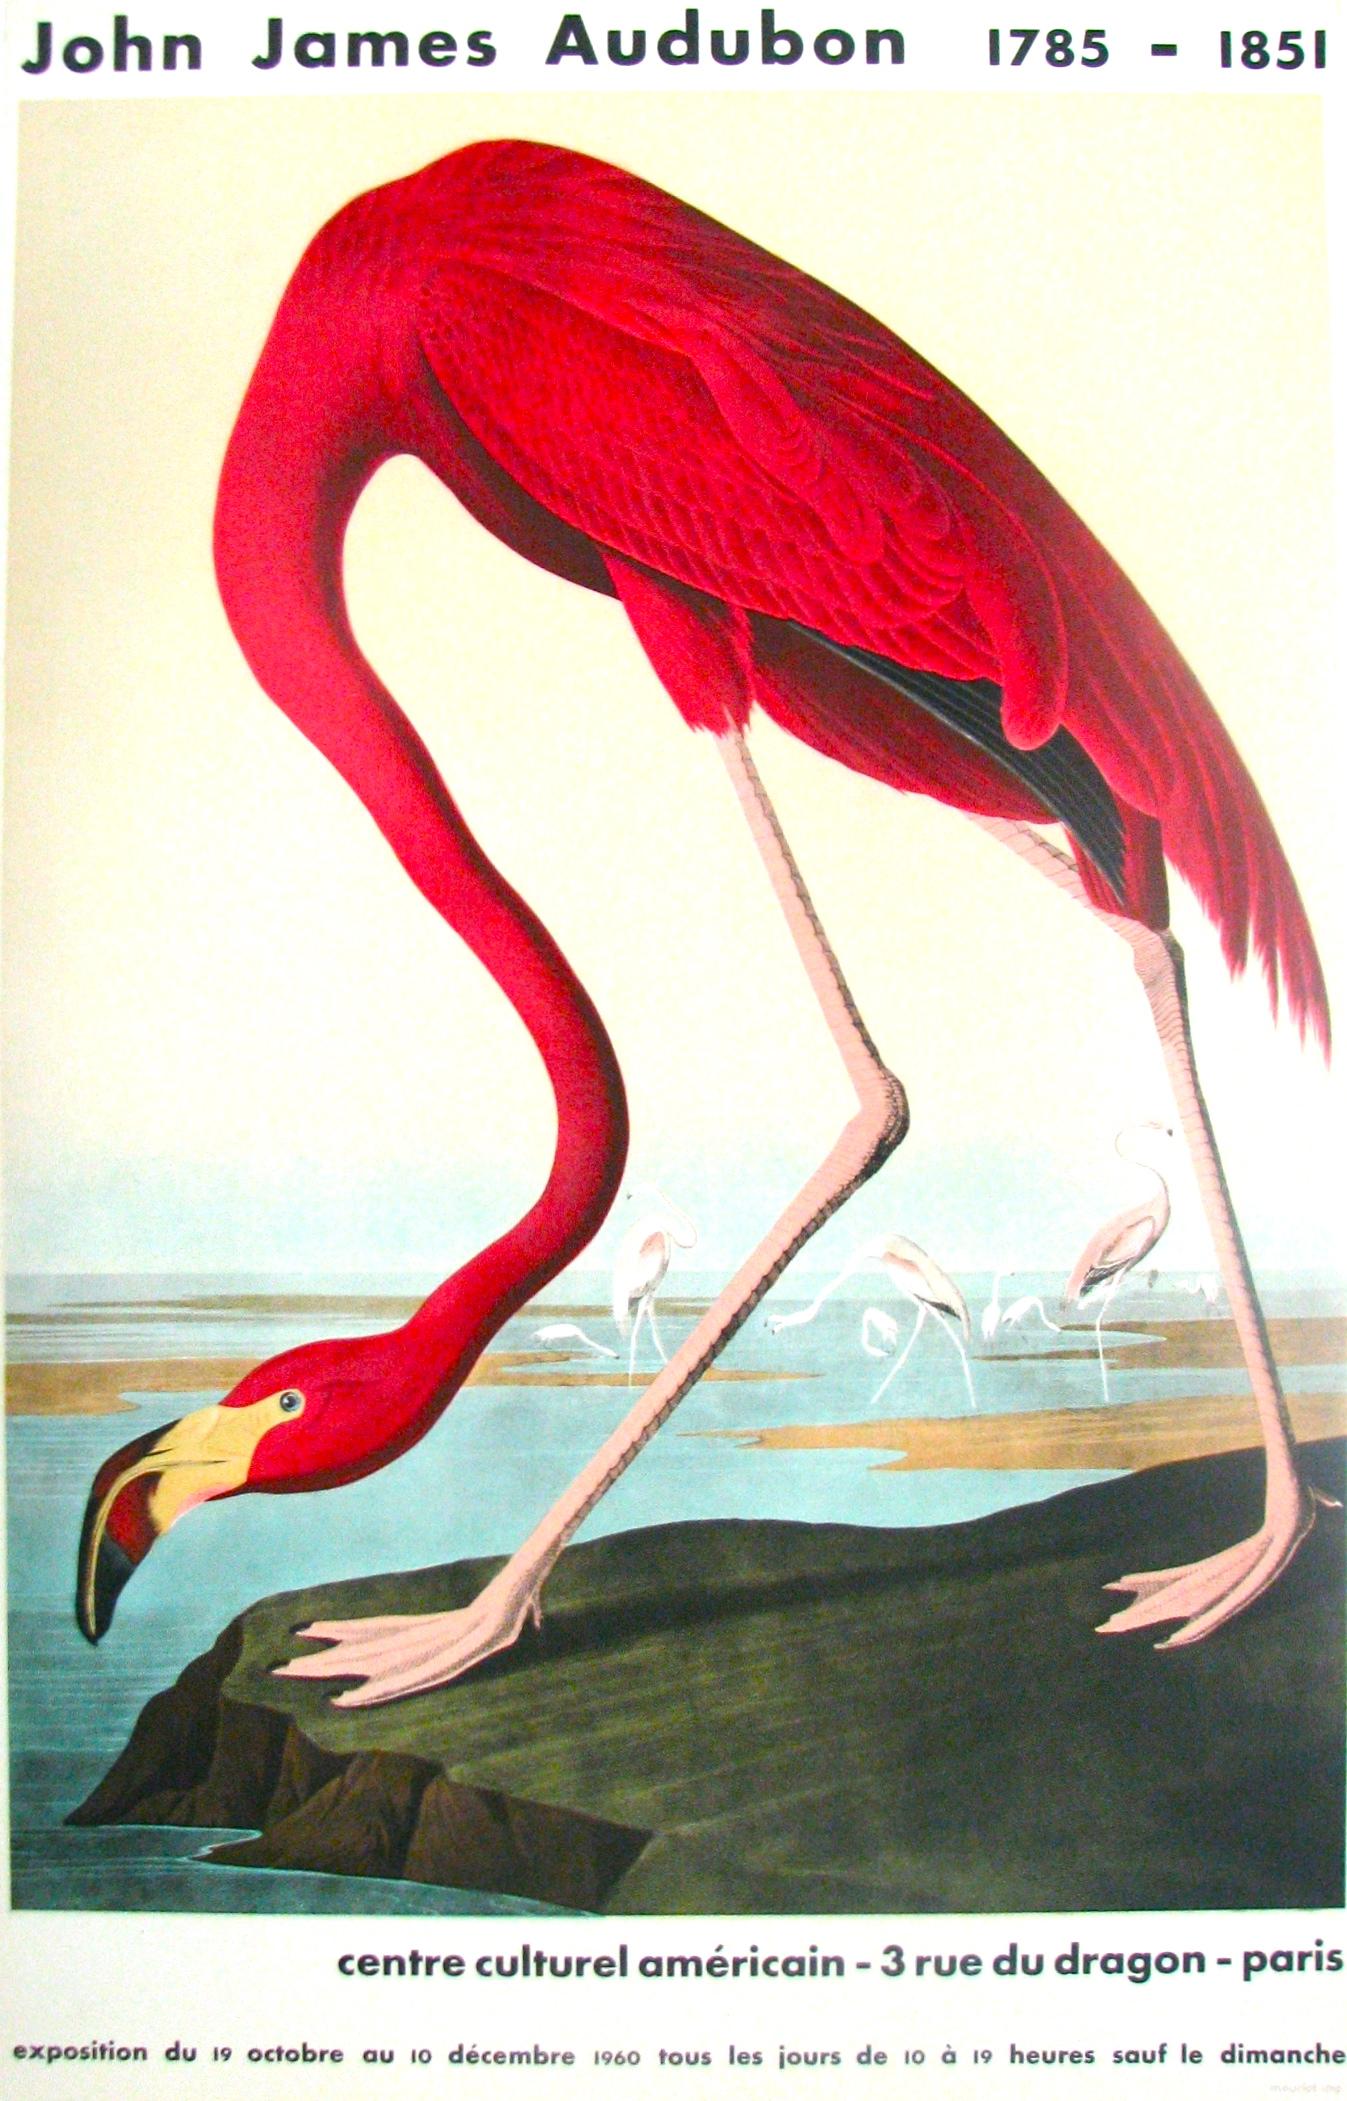 Made for the Centre Culturel Americain, Paris in 1960 for an exhibition of works by John James Audubon and printed by the Atelier Mourlot in Paris. The image used for this exhibition poster was 'American Flamingo' 1838 is one of John James Audubon’s